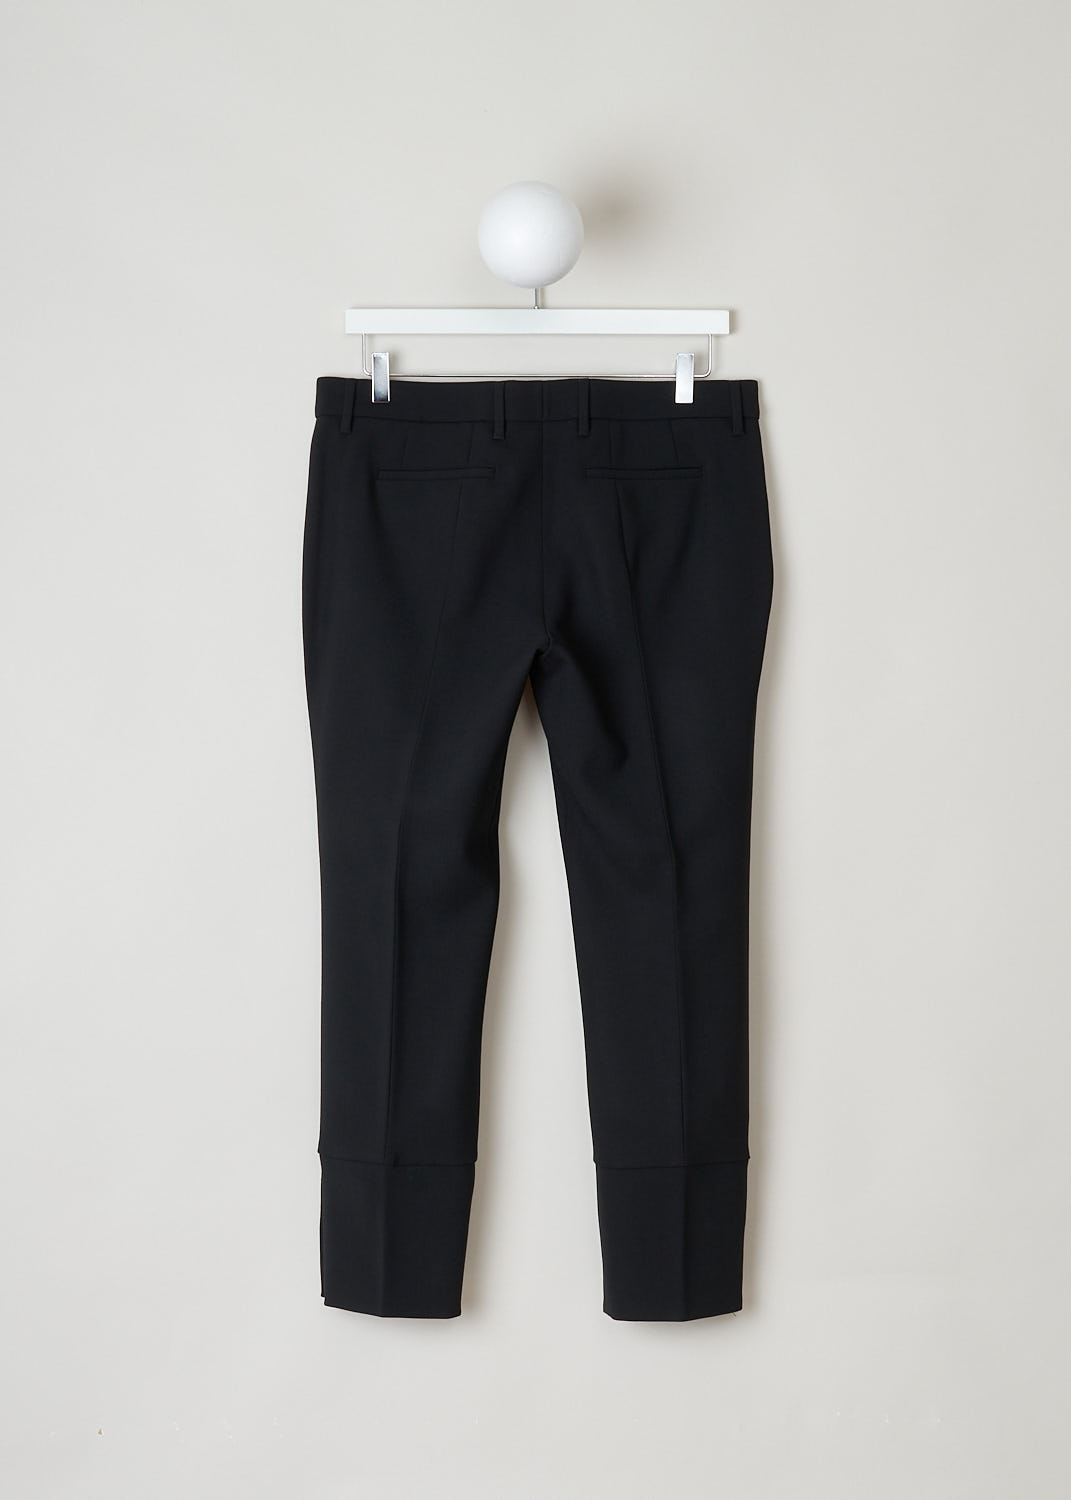 Prada, Black wool pants, Tela_Natte_STR_P2291_F0002_Nero, black, back, Made in the classic pants model. What sets this model apart is the hem, which comes adorned with a buttoned split. 